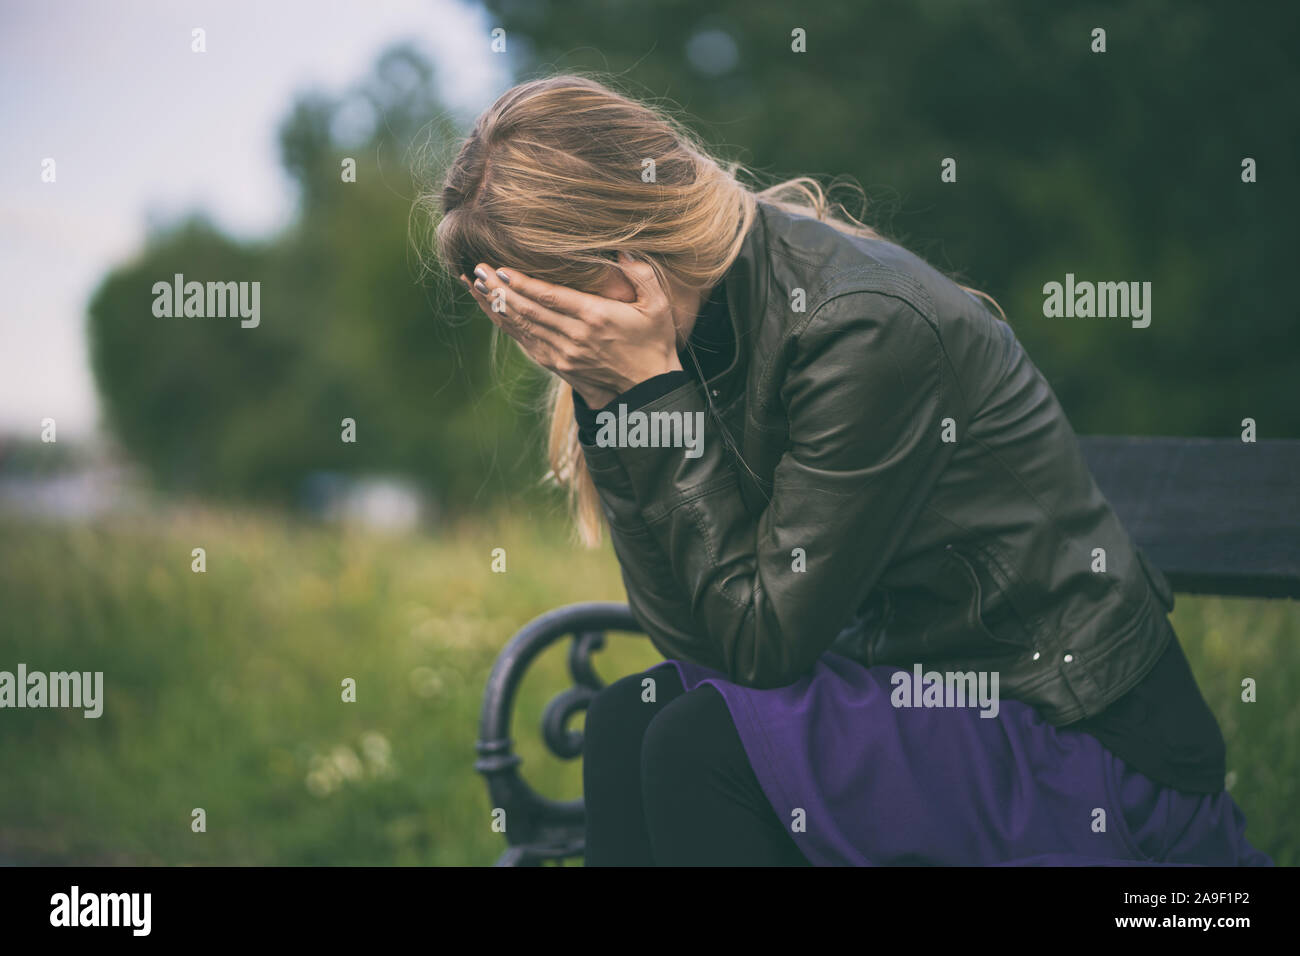 Portrait of lonely and depressed woman in grief. Stock Photo